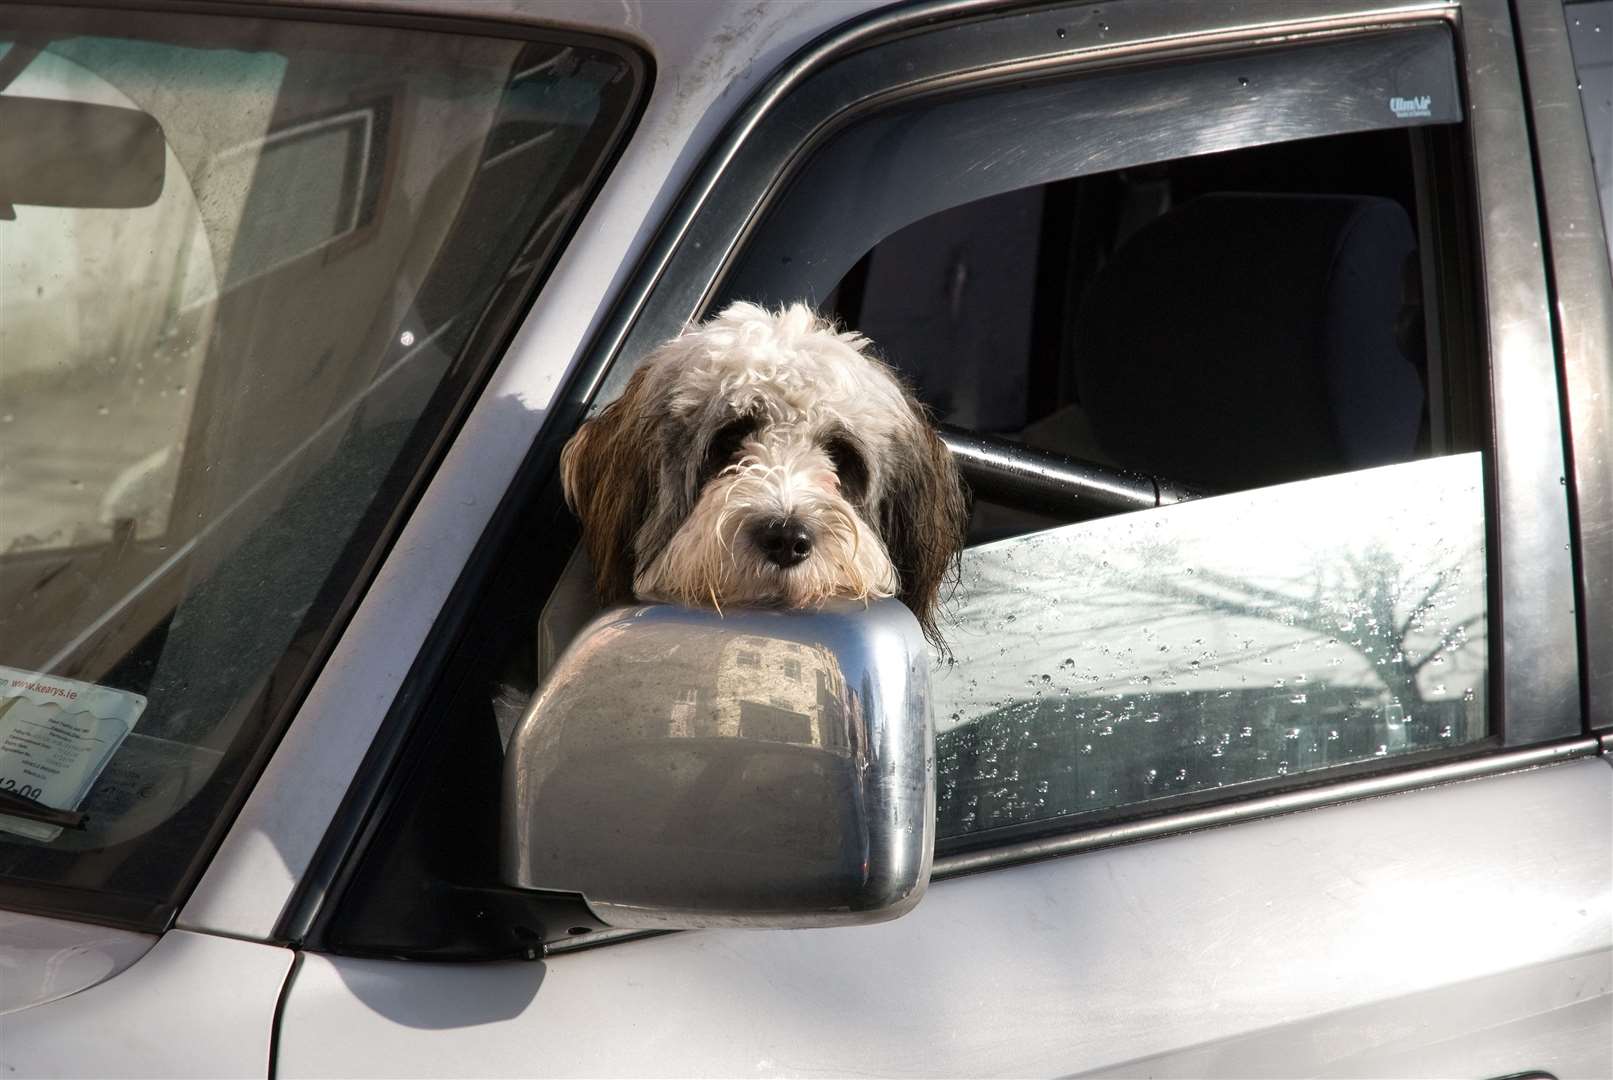 Highway Code Rule 57 states that all animals should be suitable restrained when in a car